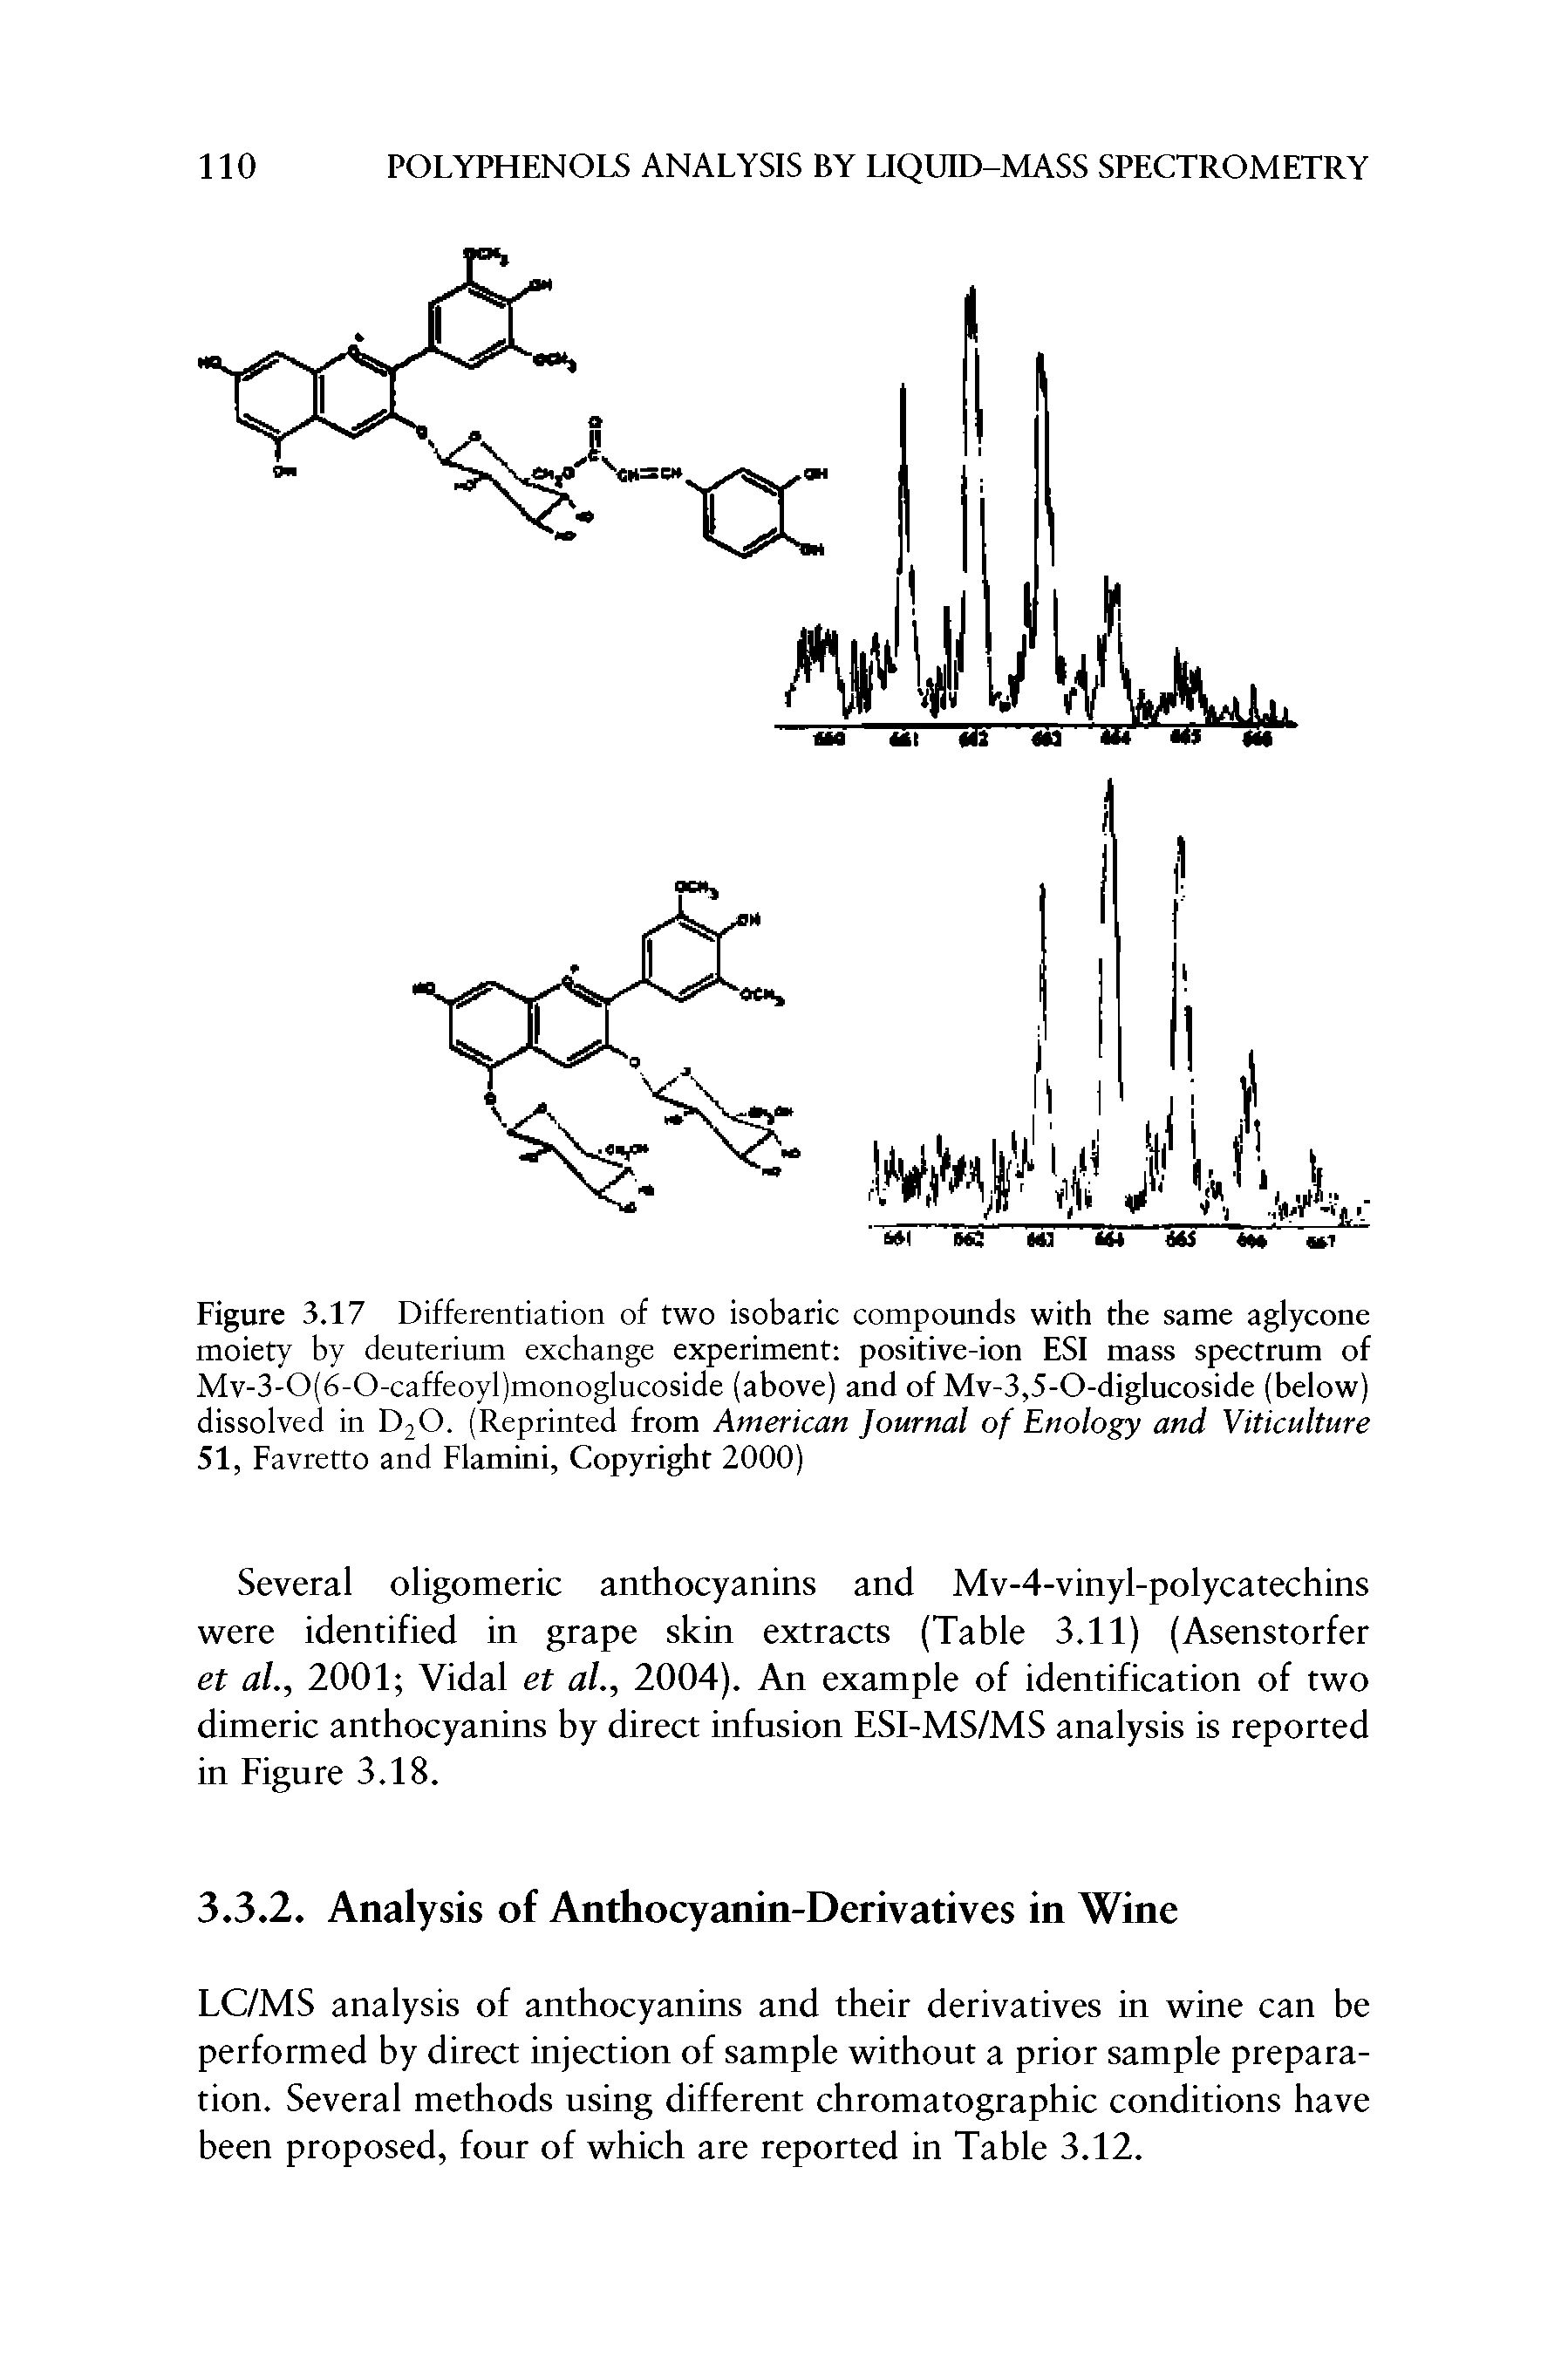 Figure 3.17 Differentiation of two isobaric compounds with the same aglycone moiety by deuterium exchange experiment positive-ion ESI mass spectrum of Mv-3-0(6-0-caffeoyl)monoglucoside (above) and of Mv-3,5-0-diglucoside (below) dissolved in D20. (Reprinted from American Journal of Enology and Viticulture 51, Favretto and Flamini, Copyright 2000)...